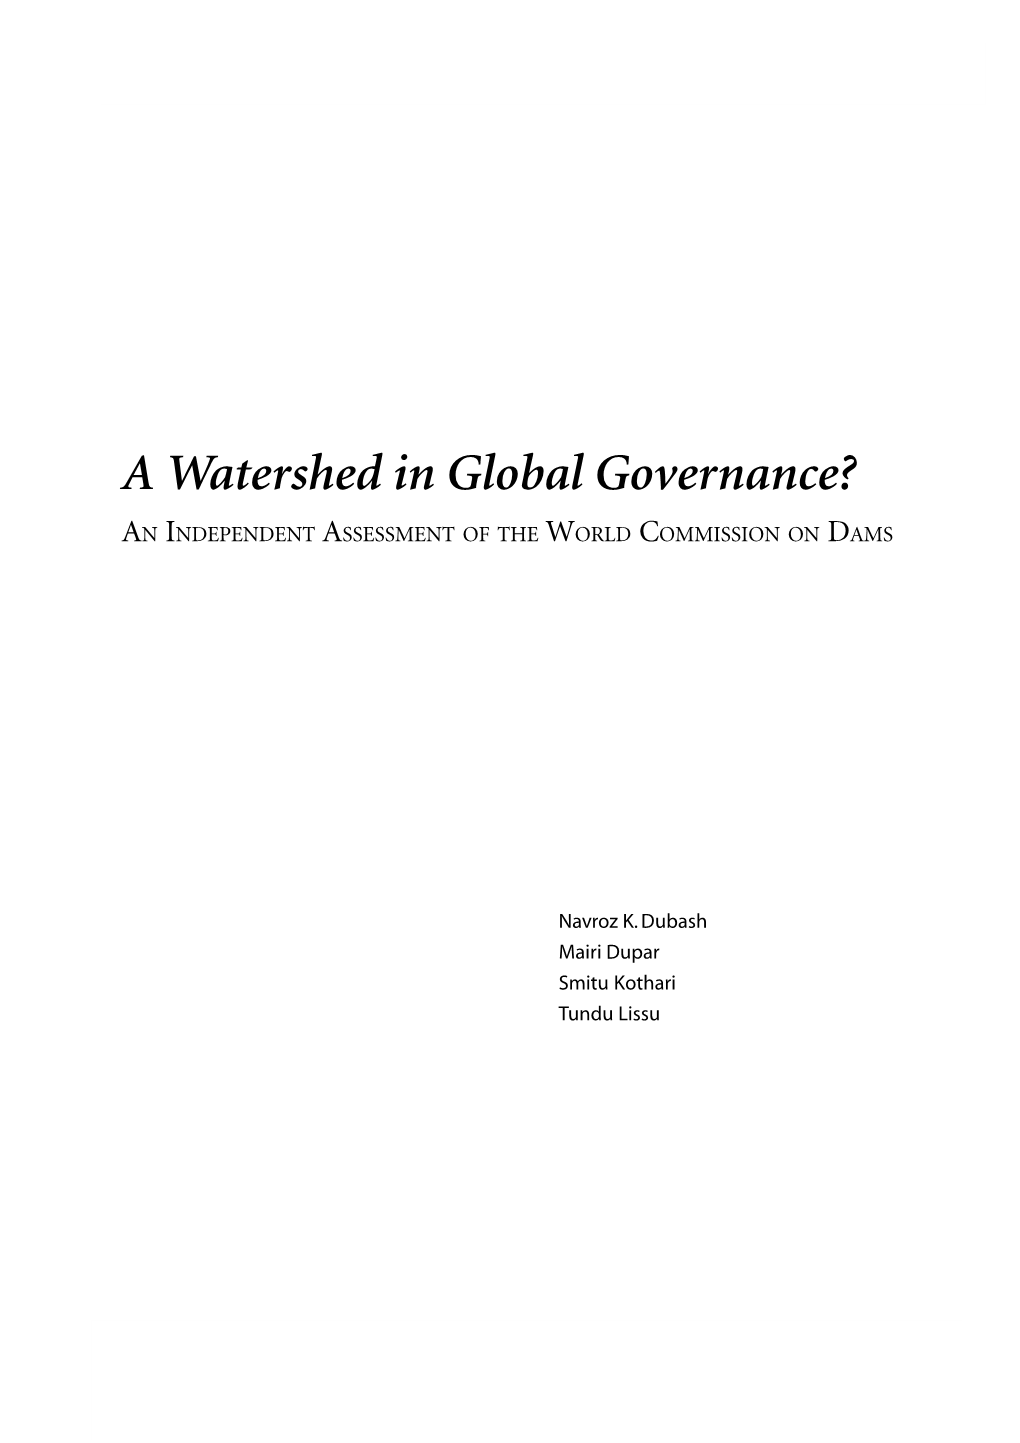 A Watershed in Global Governance? an INDEPENDENT ASSESSMENT of the WORLD COMMISSION on DAMS